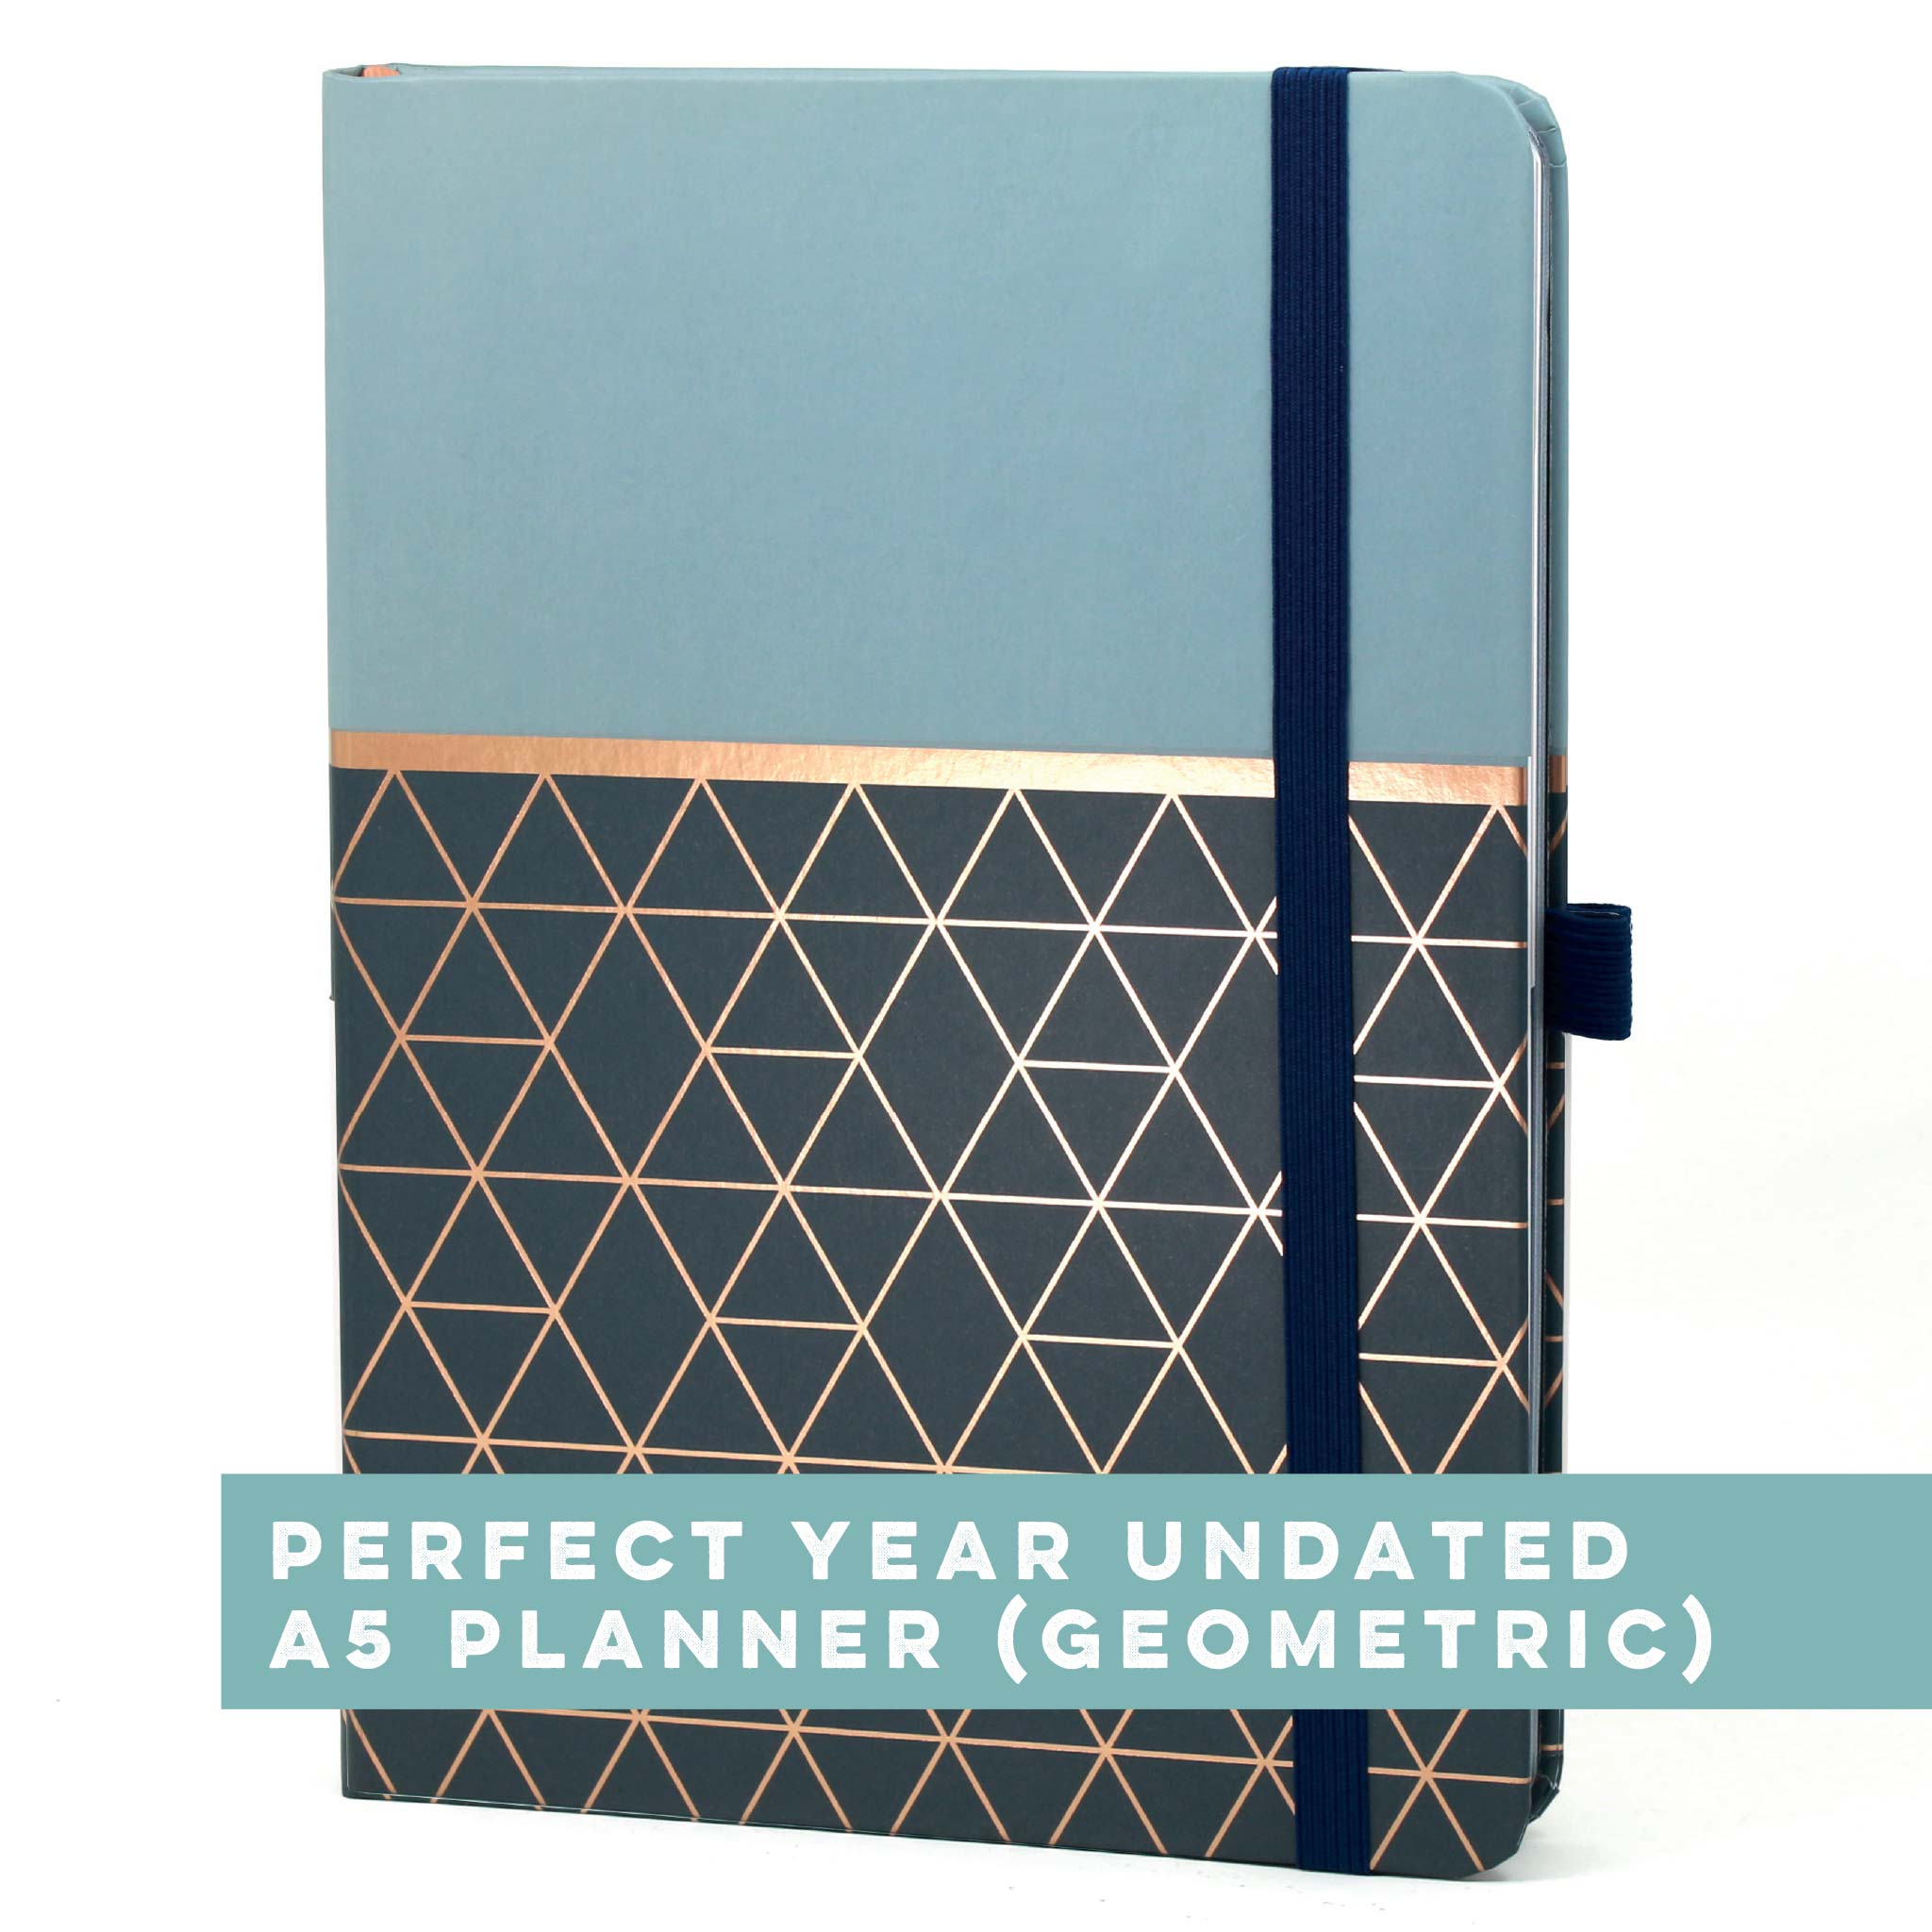 An image of Perfect Year Undated A5 Planner (Geometric) I Boxclever Press